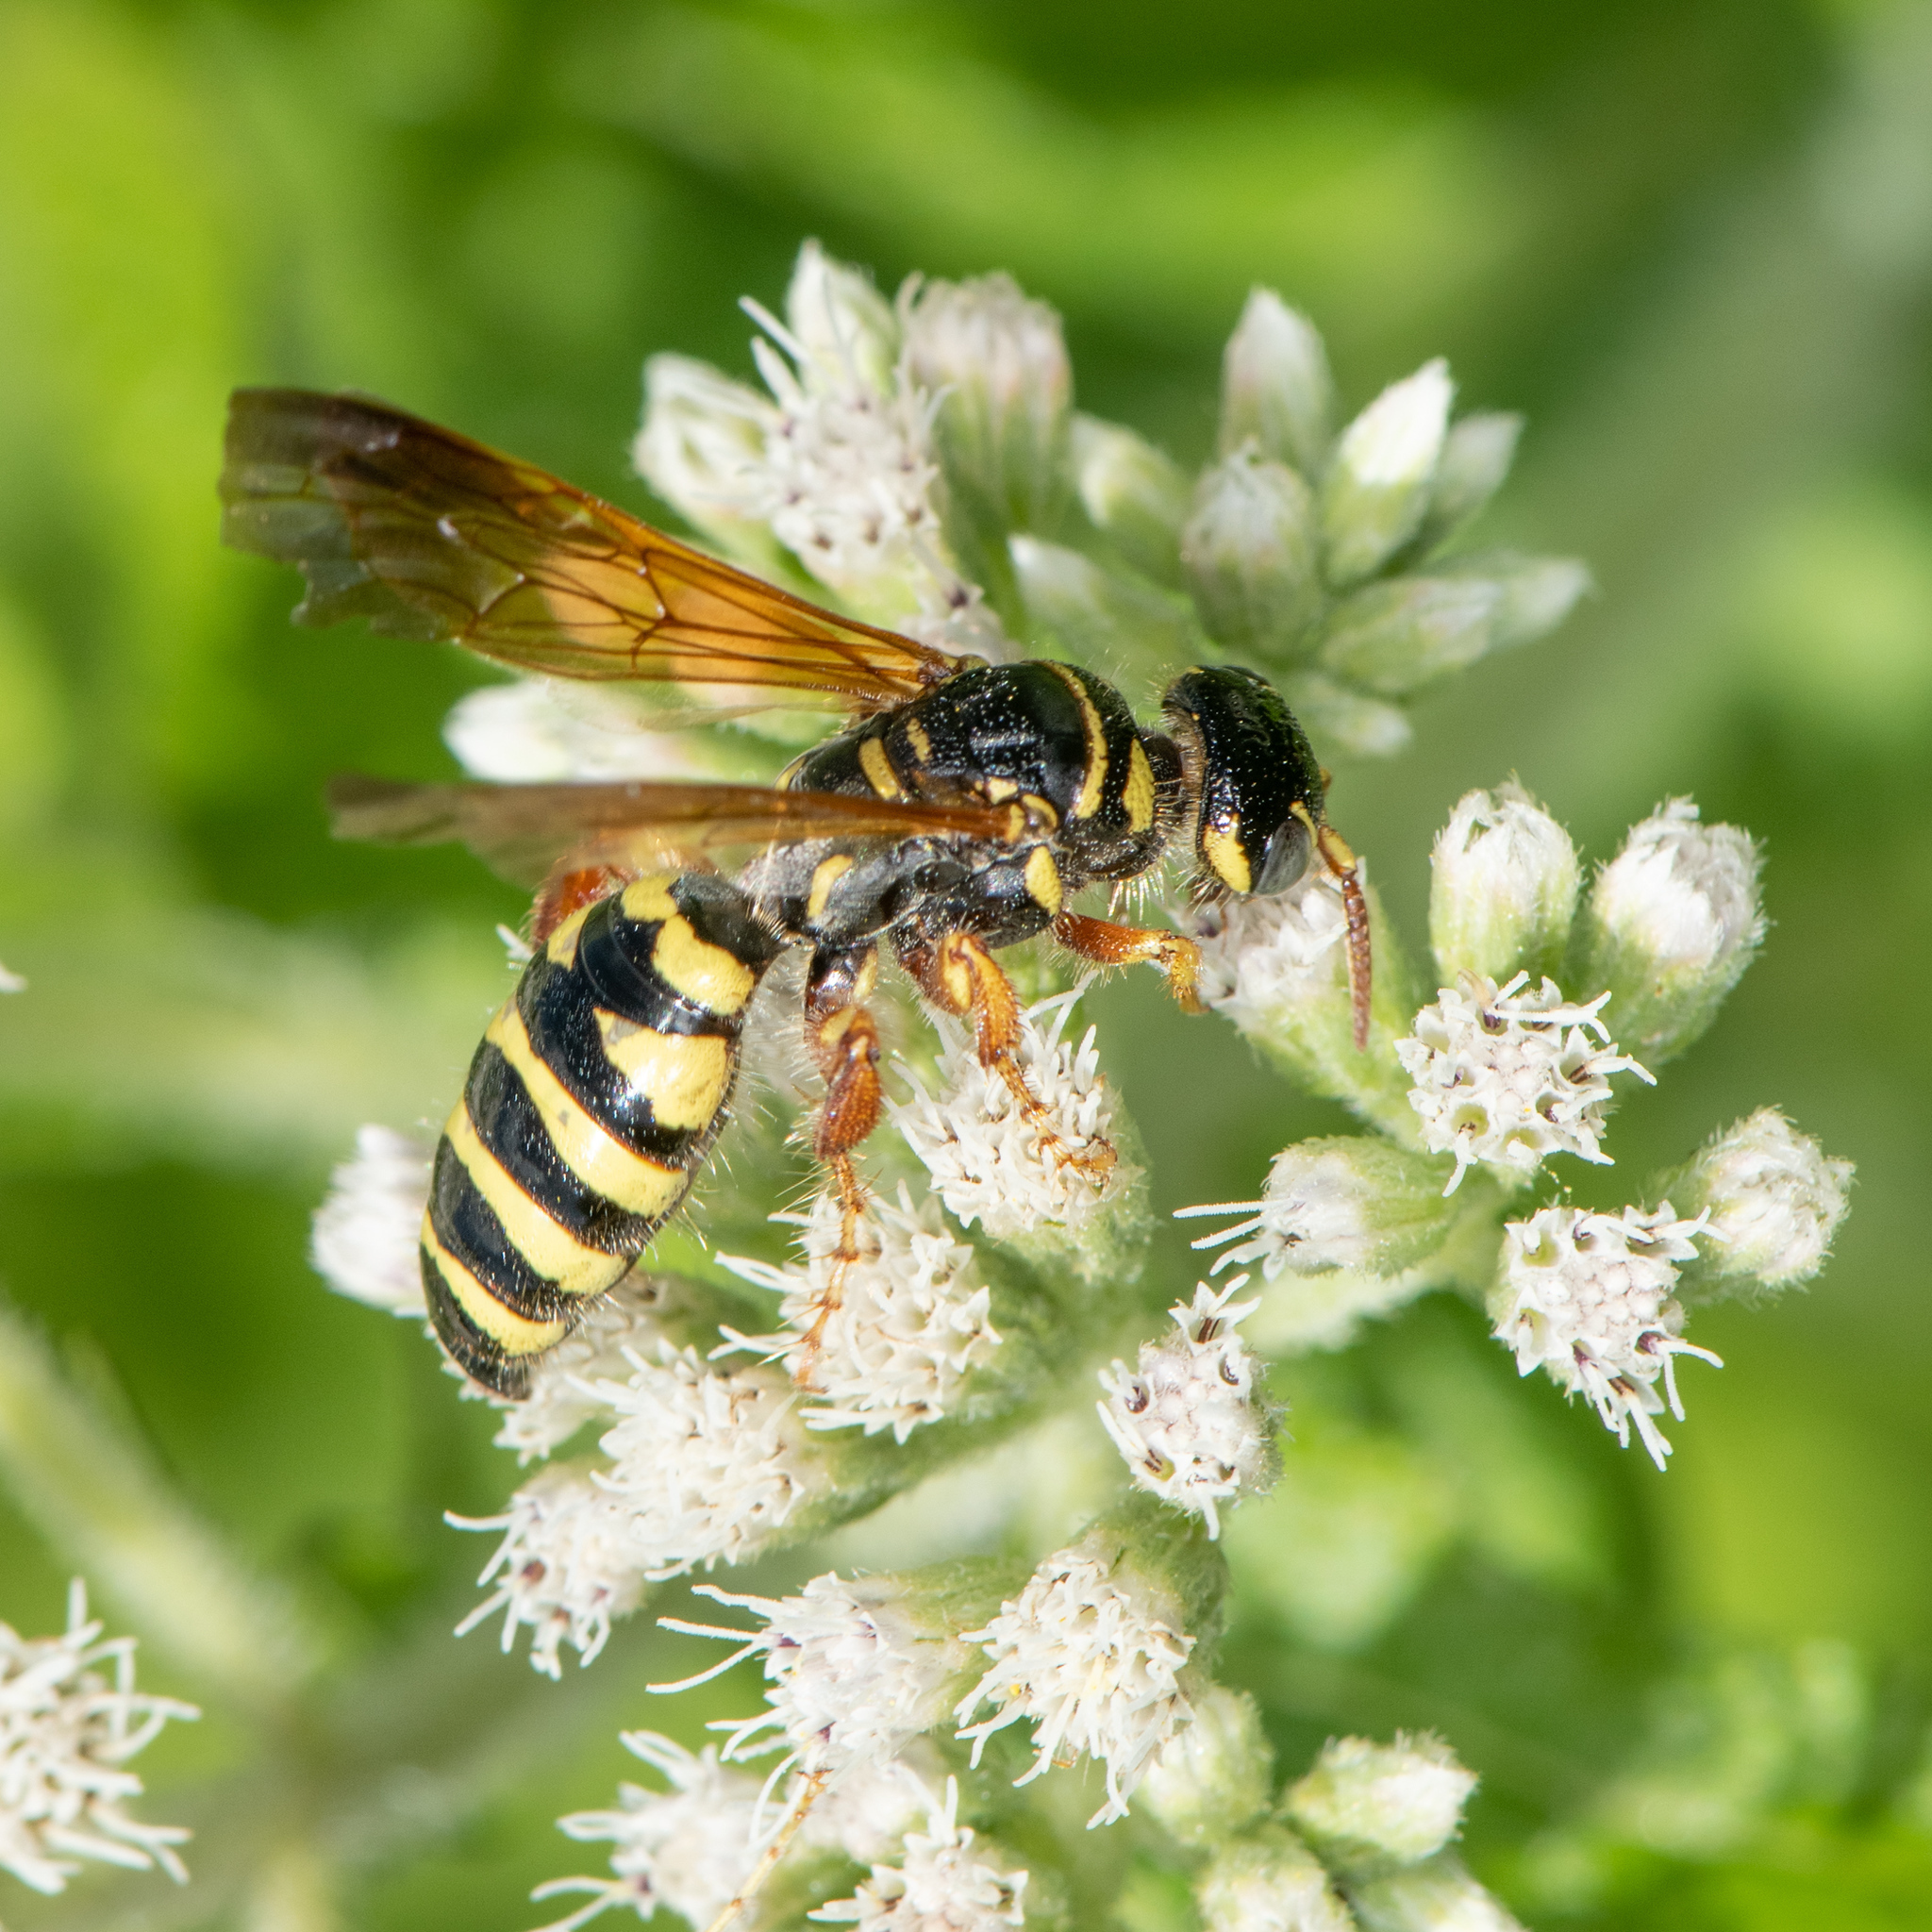 Wasps comprise 15 percent of the total number of flower-visiting insects worldwide. HEATHER HOLM